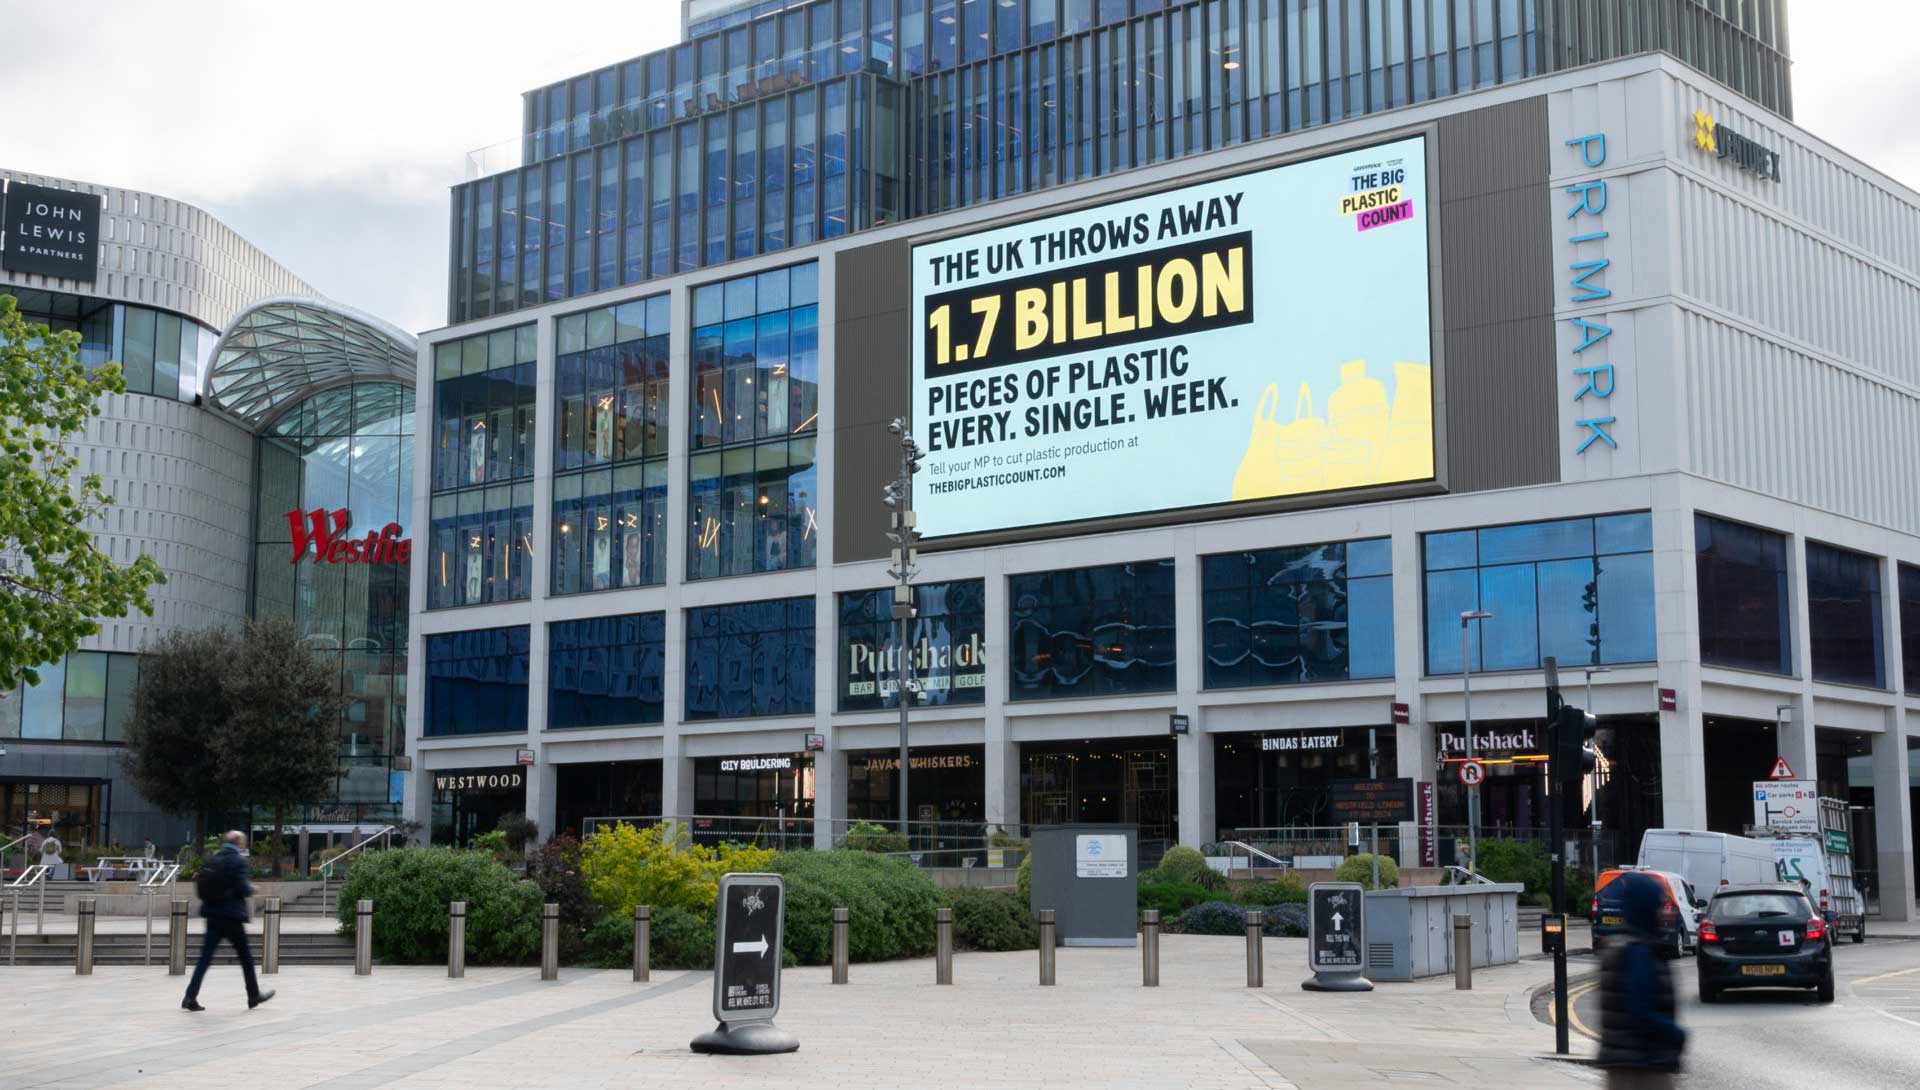 Everyday Plastic and Greenpeace UK unveil nationwide OOH campaign tackling UK plastic consumption